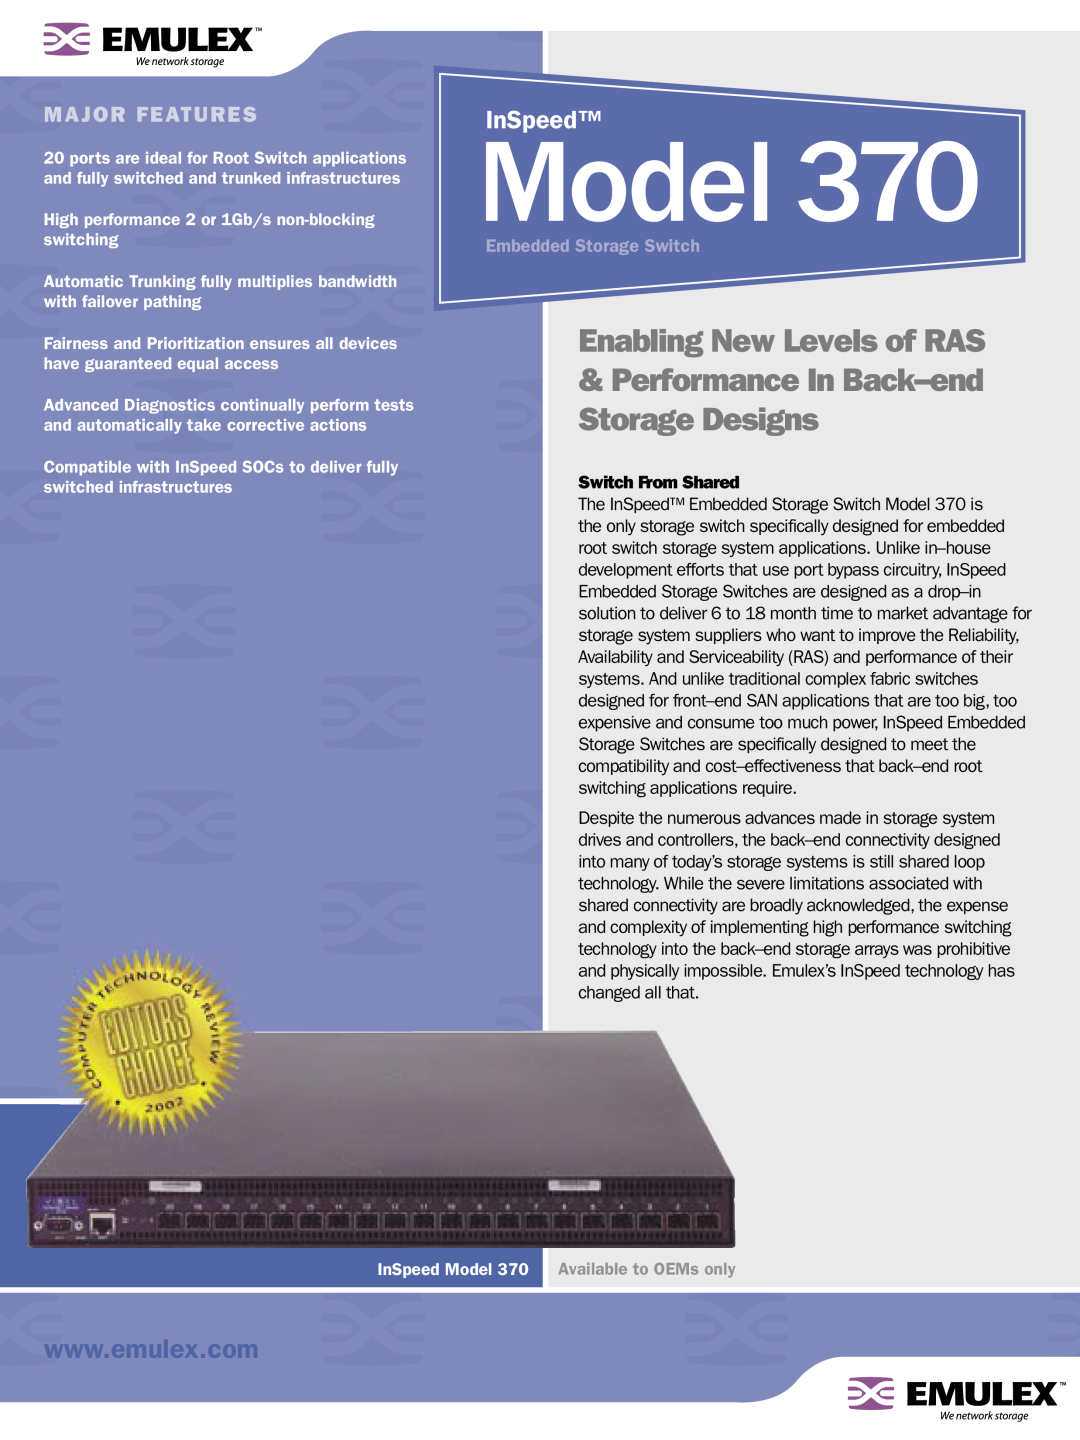 Emulex 370 manual Switch From Shared, Model, Enabling New Levels of RAS Performance In Back-end Storage Designs, InSpeed 